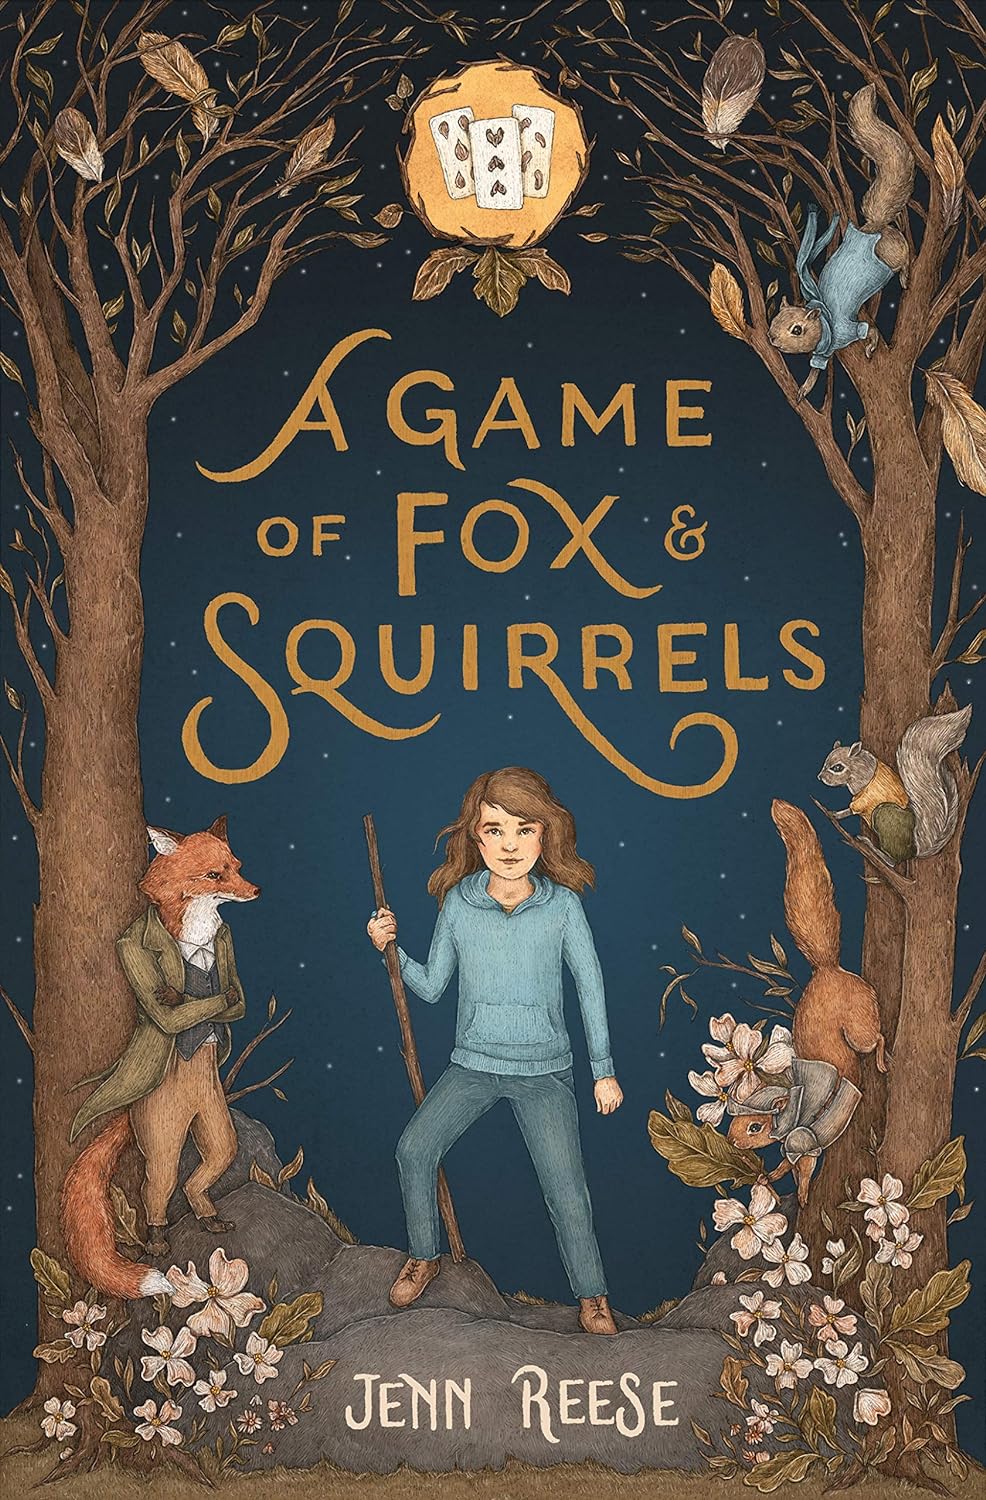 Cover of ‘A Game of Fox & Squirrels’ by Jenn Reese. A young brunette girl in a blue hoodie and jeans holds a branch as a walking stick in a forest at night, surrounded by trees and flowers. On the left, a fox in an olive green overcoat stands leaning against a tree, arms crossed. On the right, three squirrels climb a tree: one wearing a blue blouse and scarf at the top, another in a yellow vest in the middle, and the third in a knight’s helmet and armor at the bottom. The title, ‘A Game of Fox & Squirrels,’ is written in brown script above the girl, with the author’s name, Jenn Reese, in white below her. The color scheme is earthy, with a deep blue sky dotted with stars.